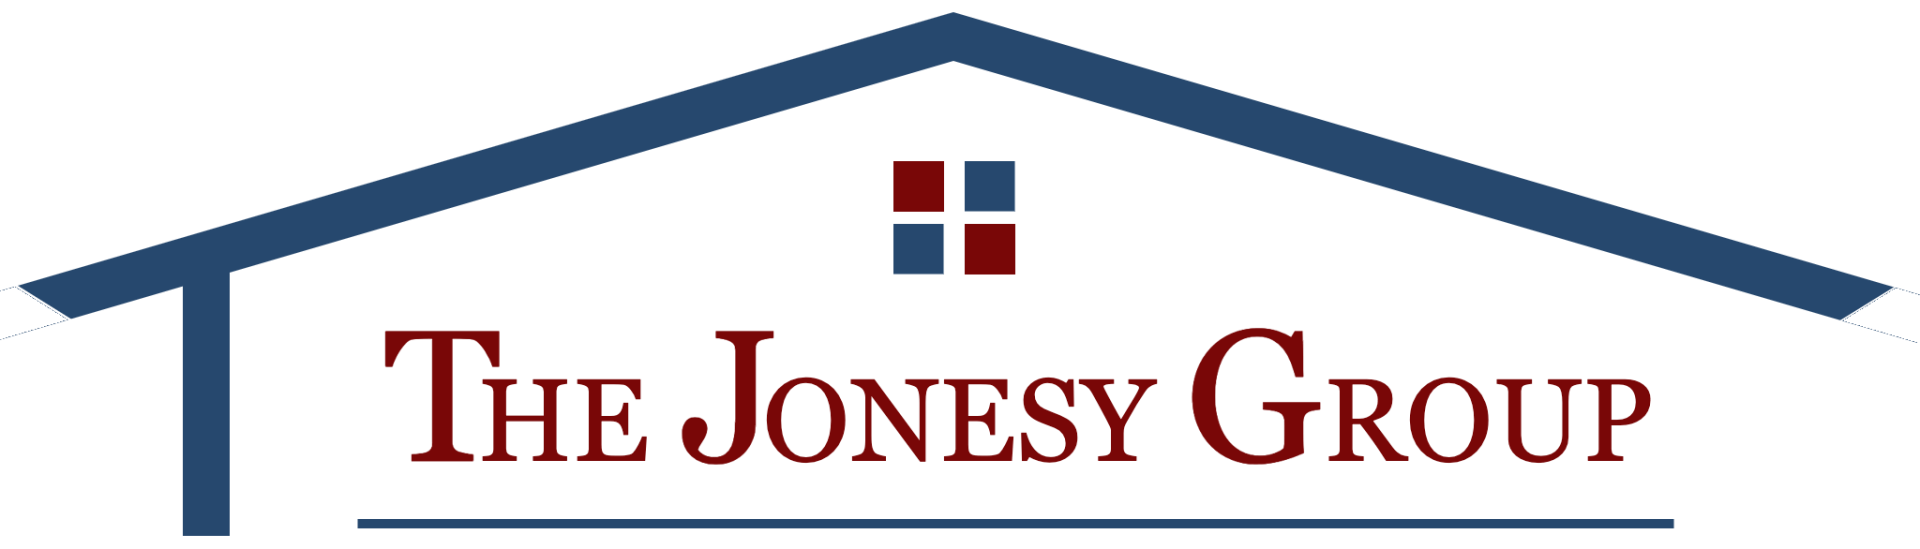 The Jonesy Group | See What Our Past Clients Have to Say